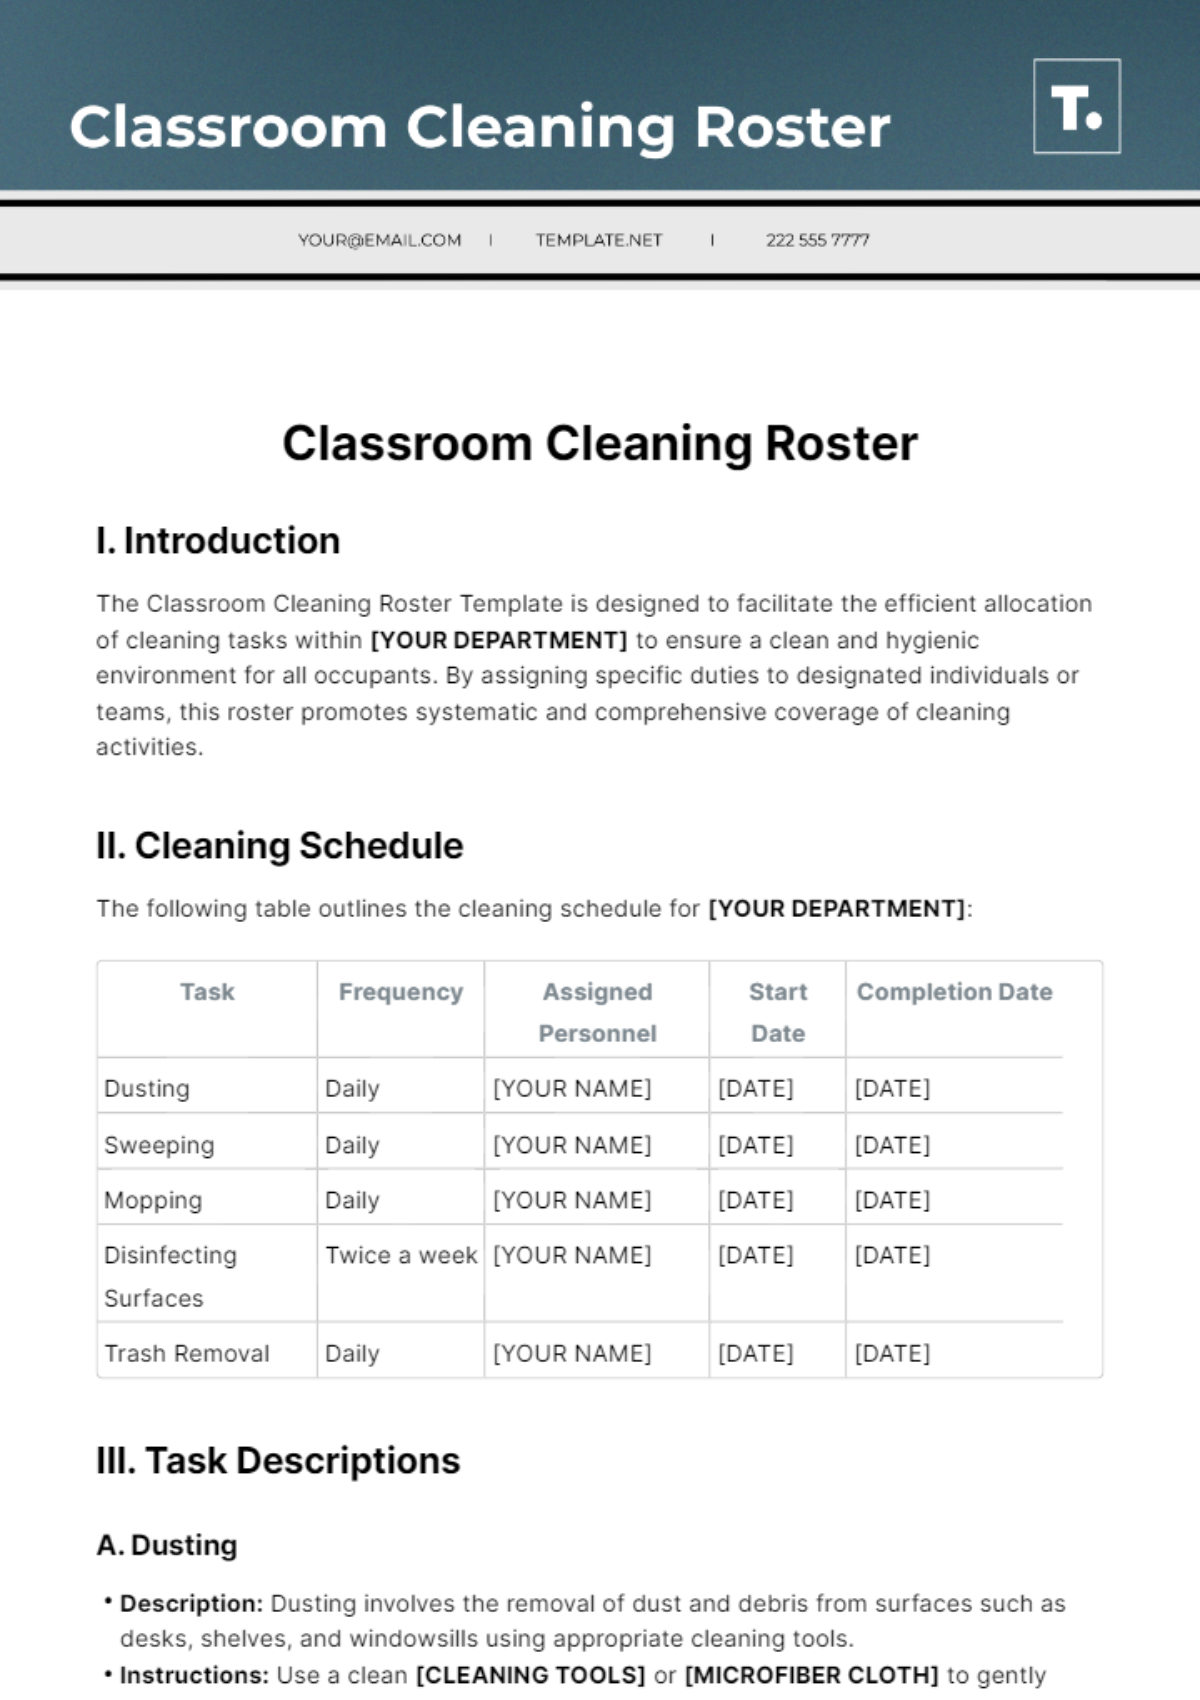 Classroom Cleaning Roster Template